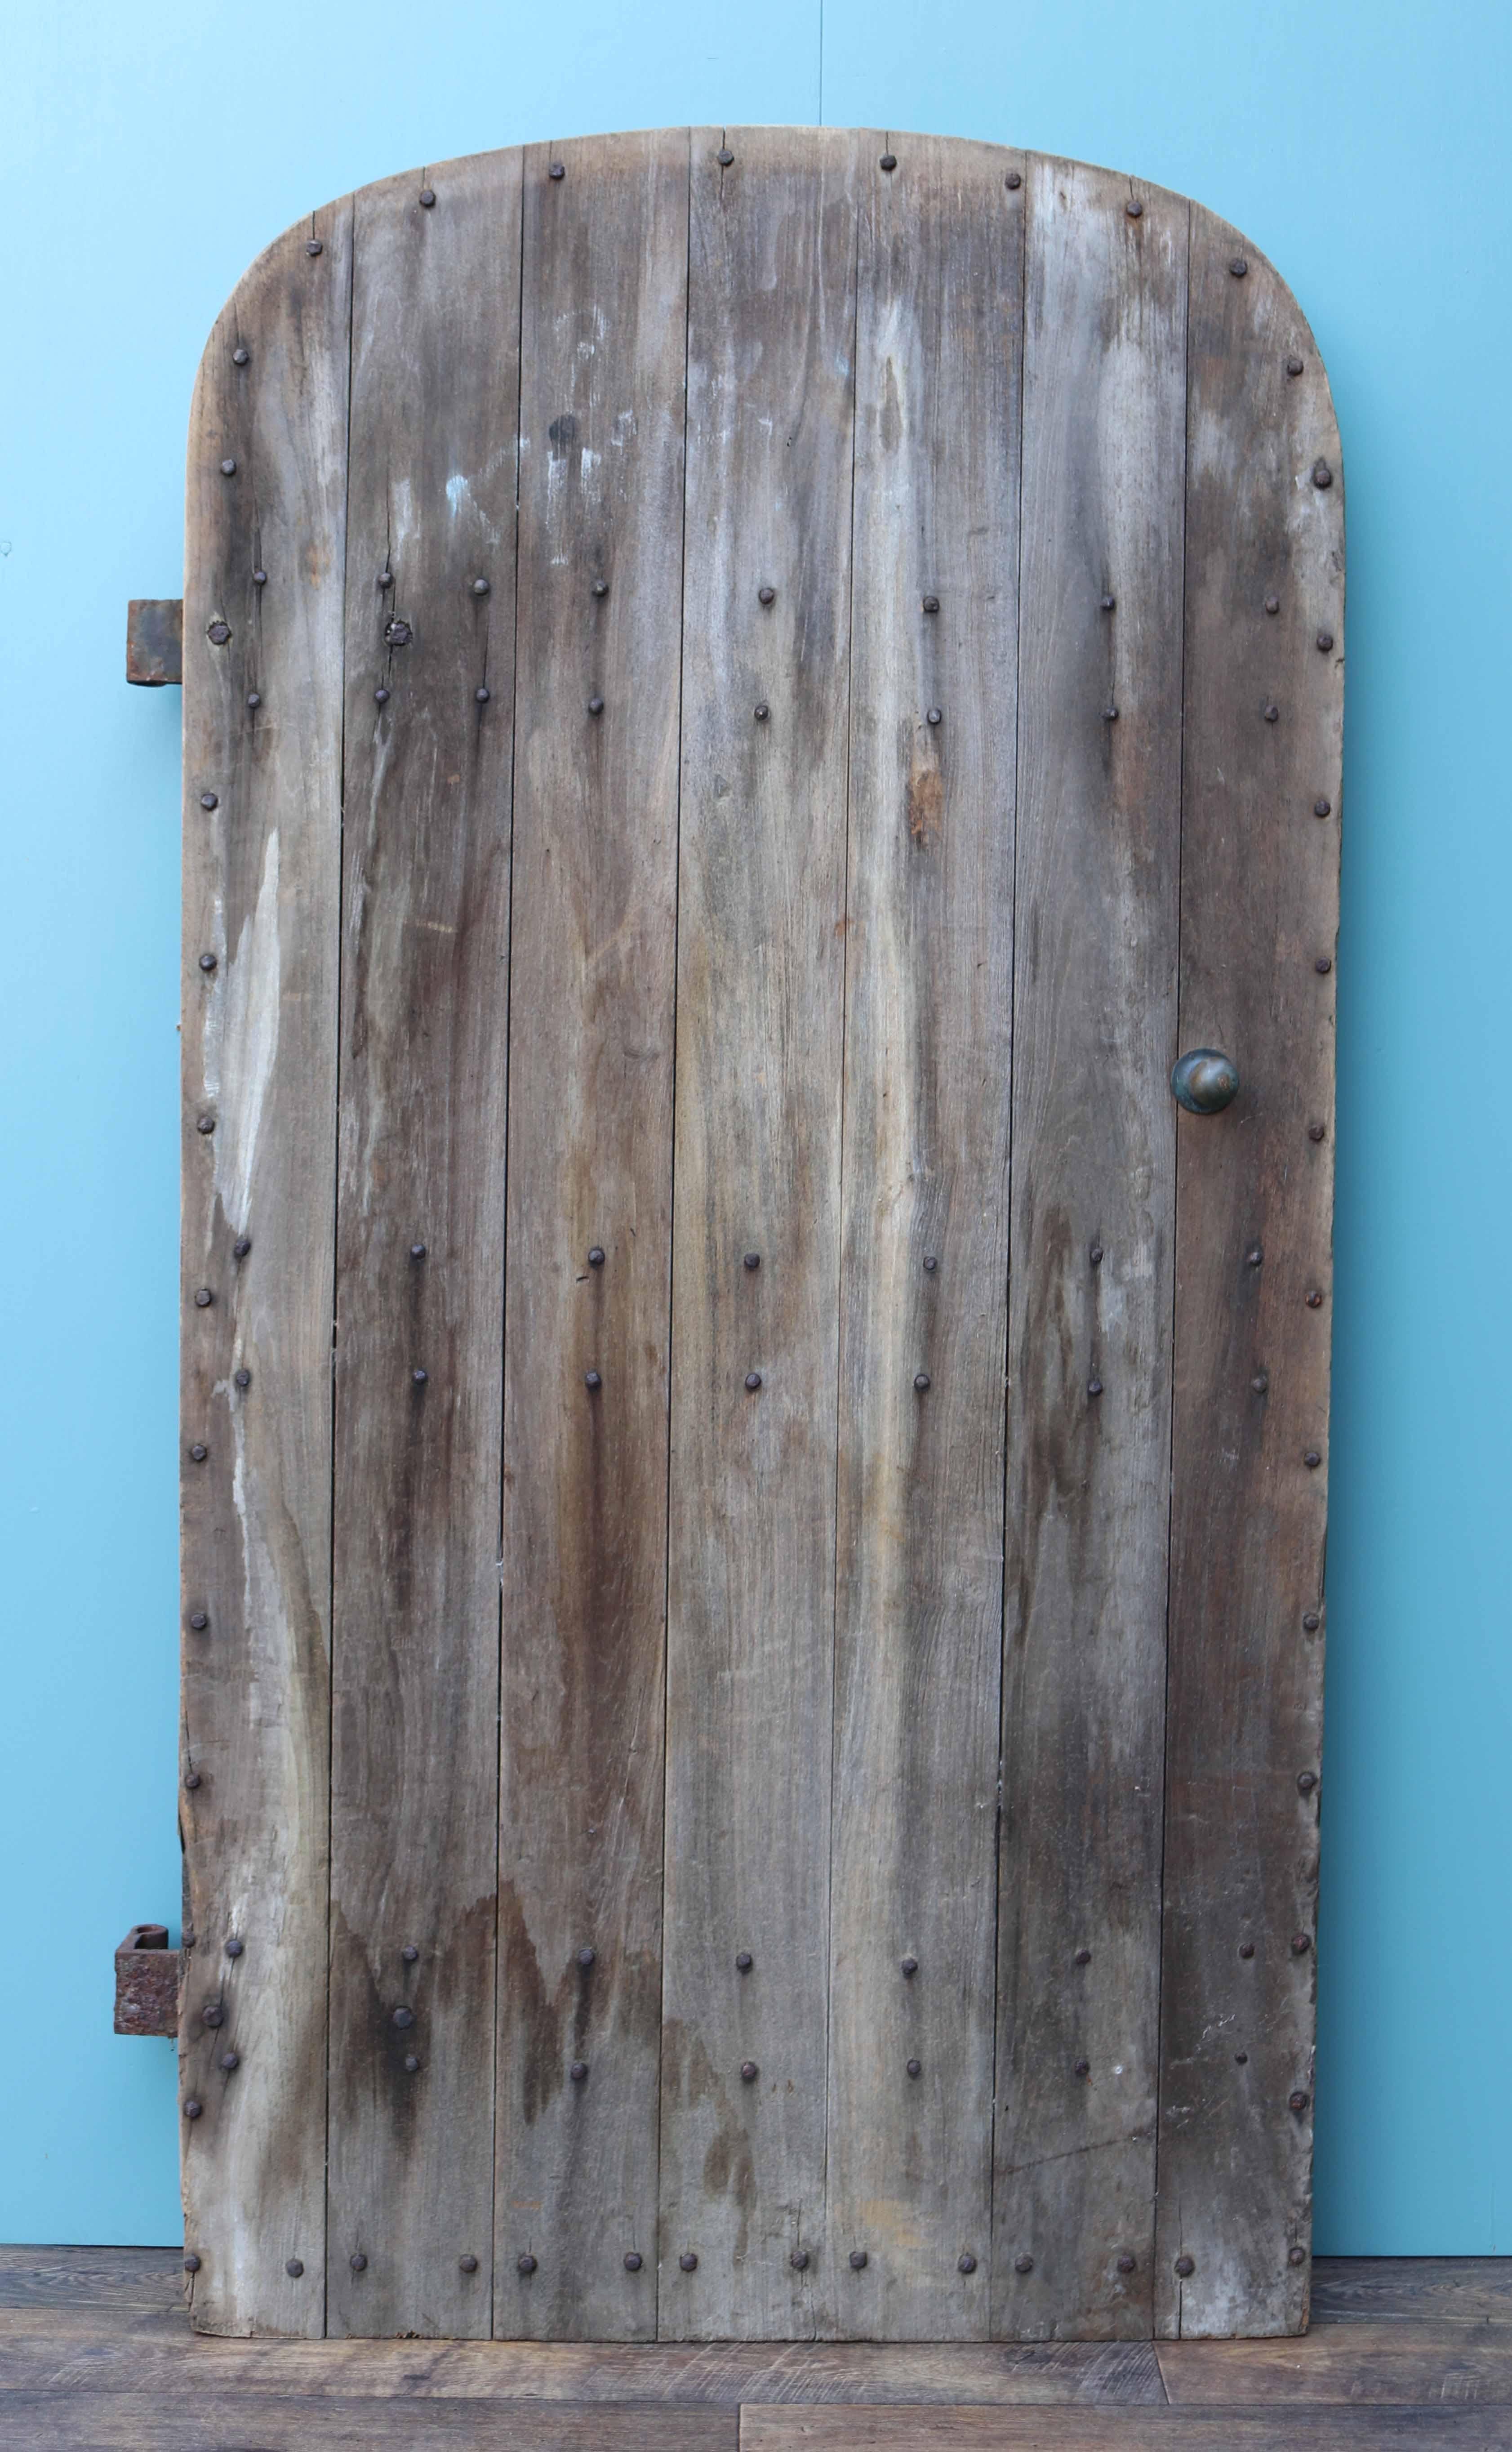 About

An unusual English studded teak door. Believed to have been made from reclaimed ship timbers. Removed from a property in Somerset.

Condition report

This door is in excellent structural condition, there is some minor water